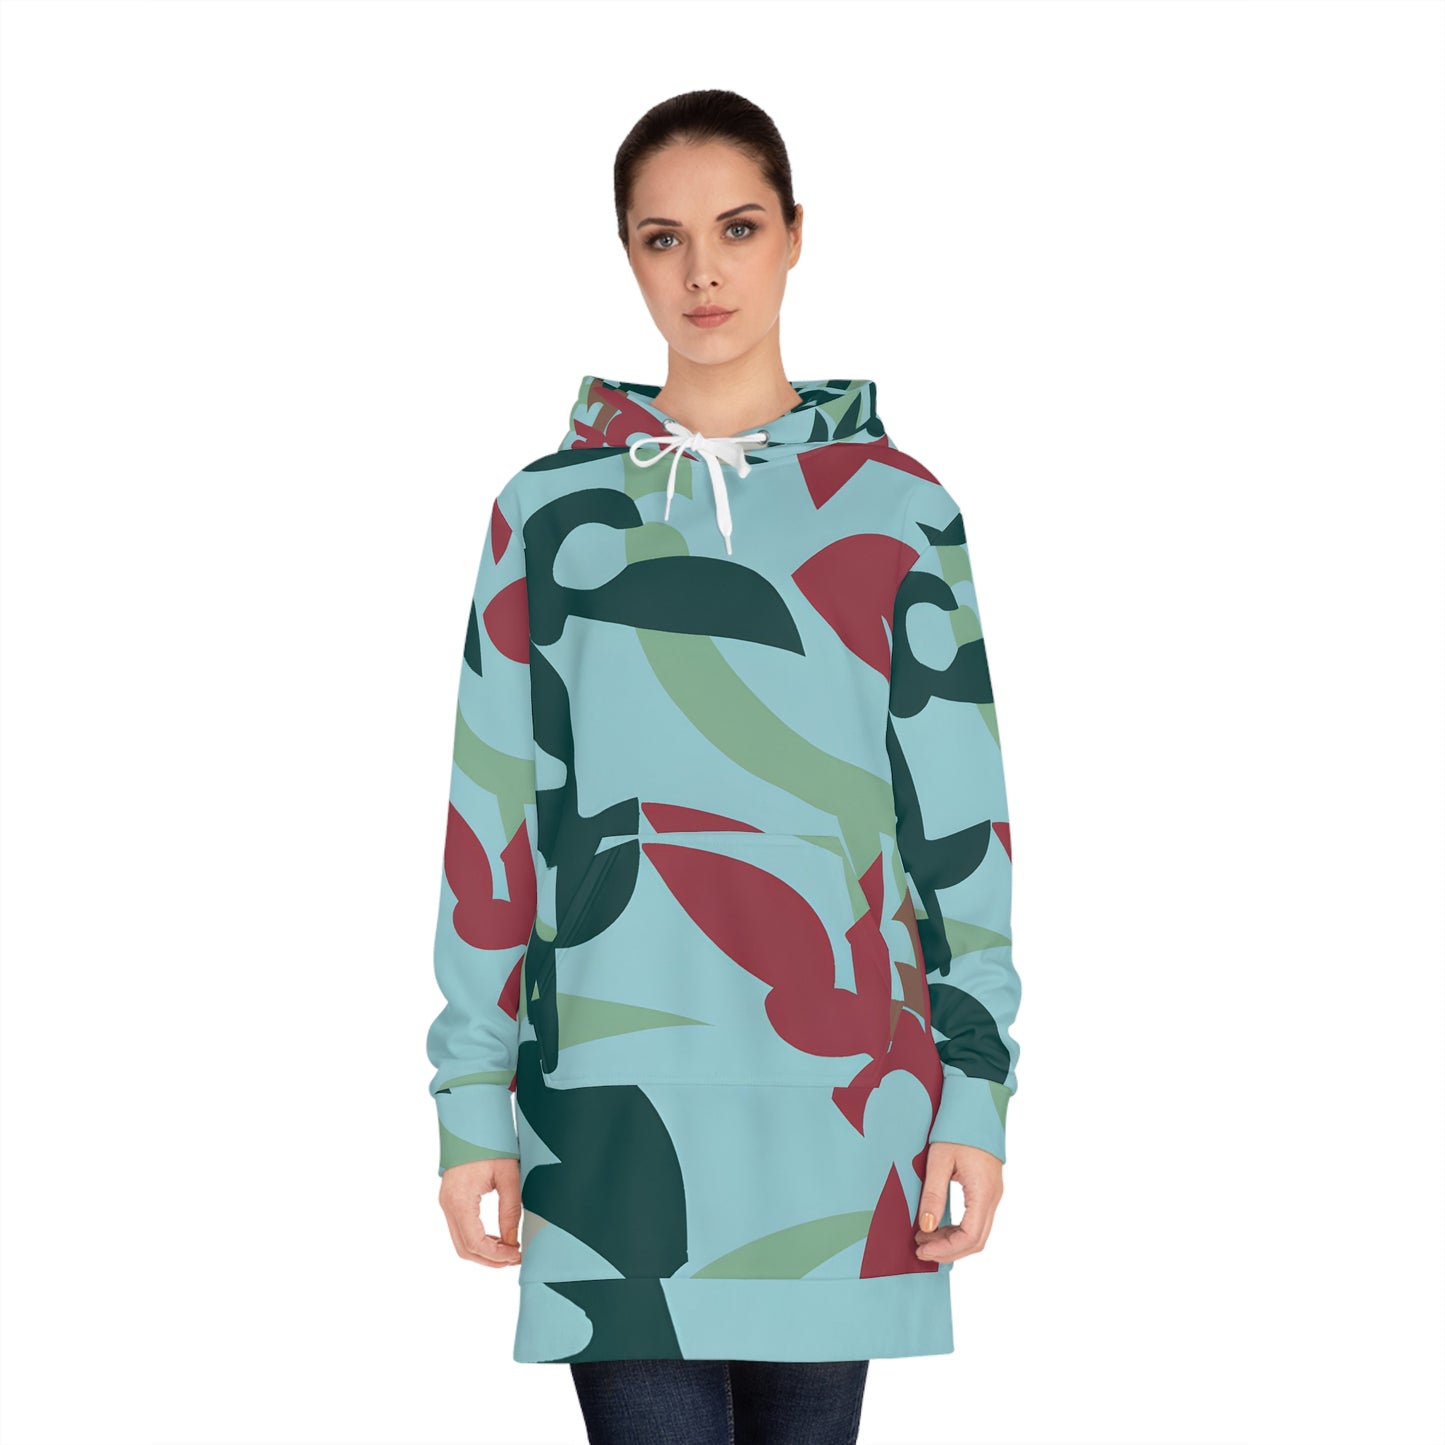 Chaparral Ione - Women's Hoodie Dress